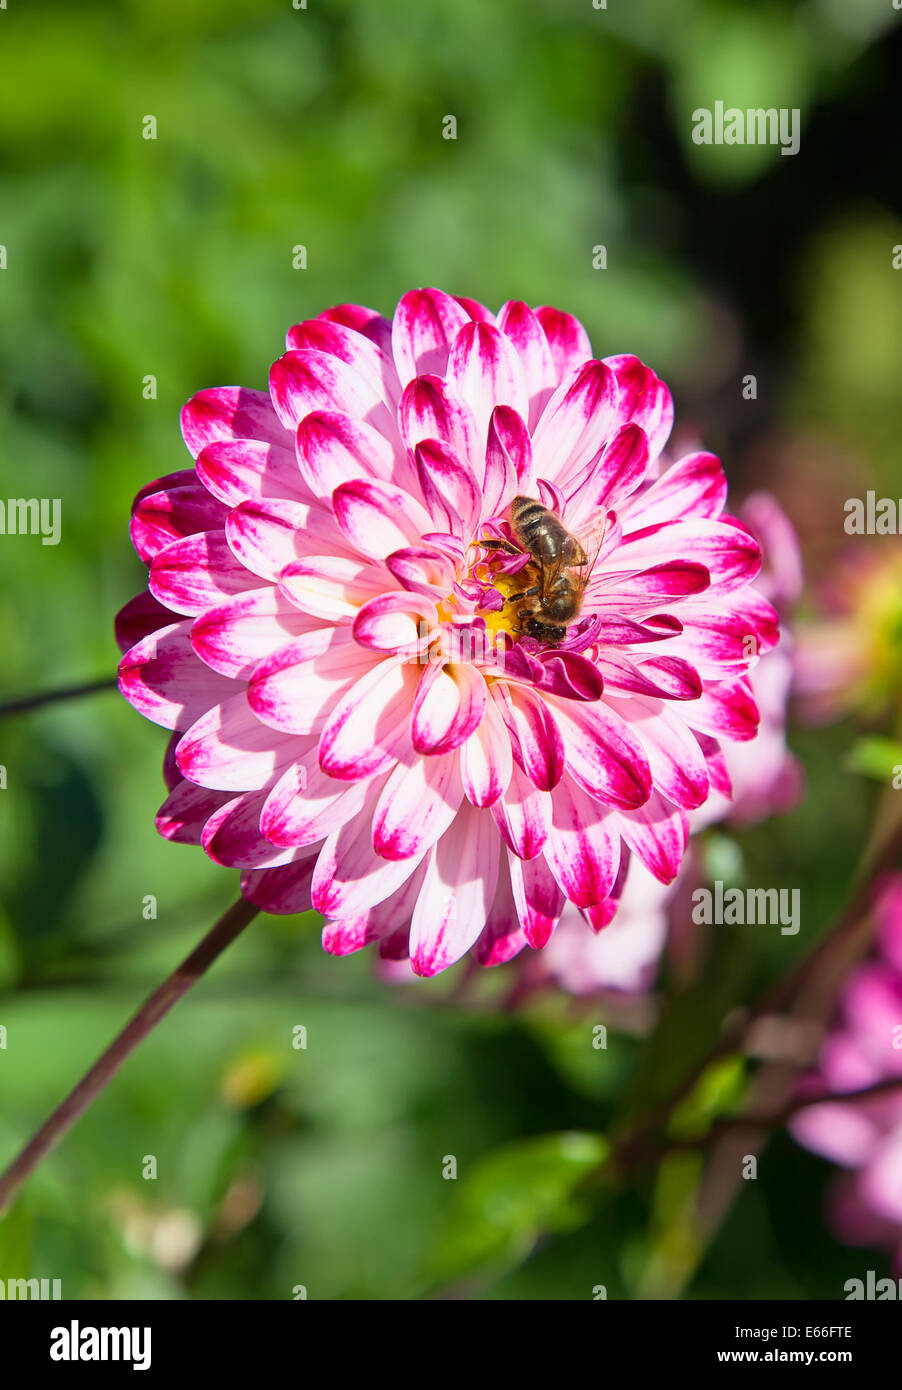 Colorful dahlia flower with bee Stock Photo